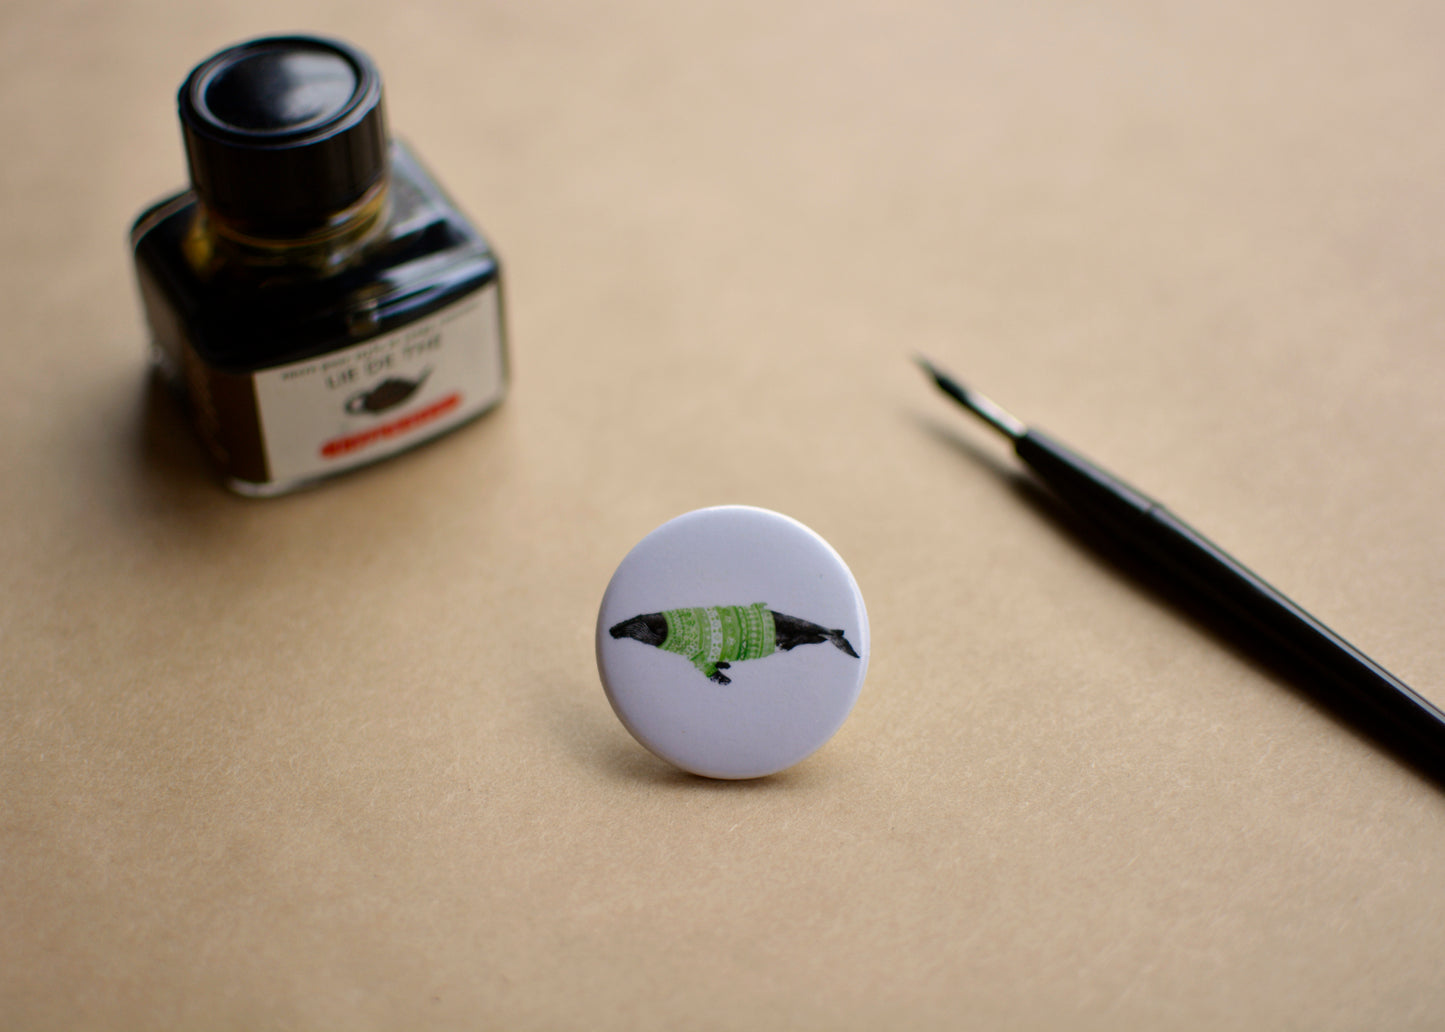 Ink drawing of a humpback whale wearing a green sweater on a pin-backed button. Image features a ink bottle and dip pen.